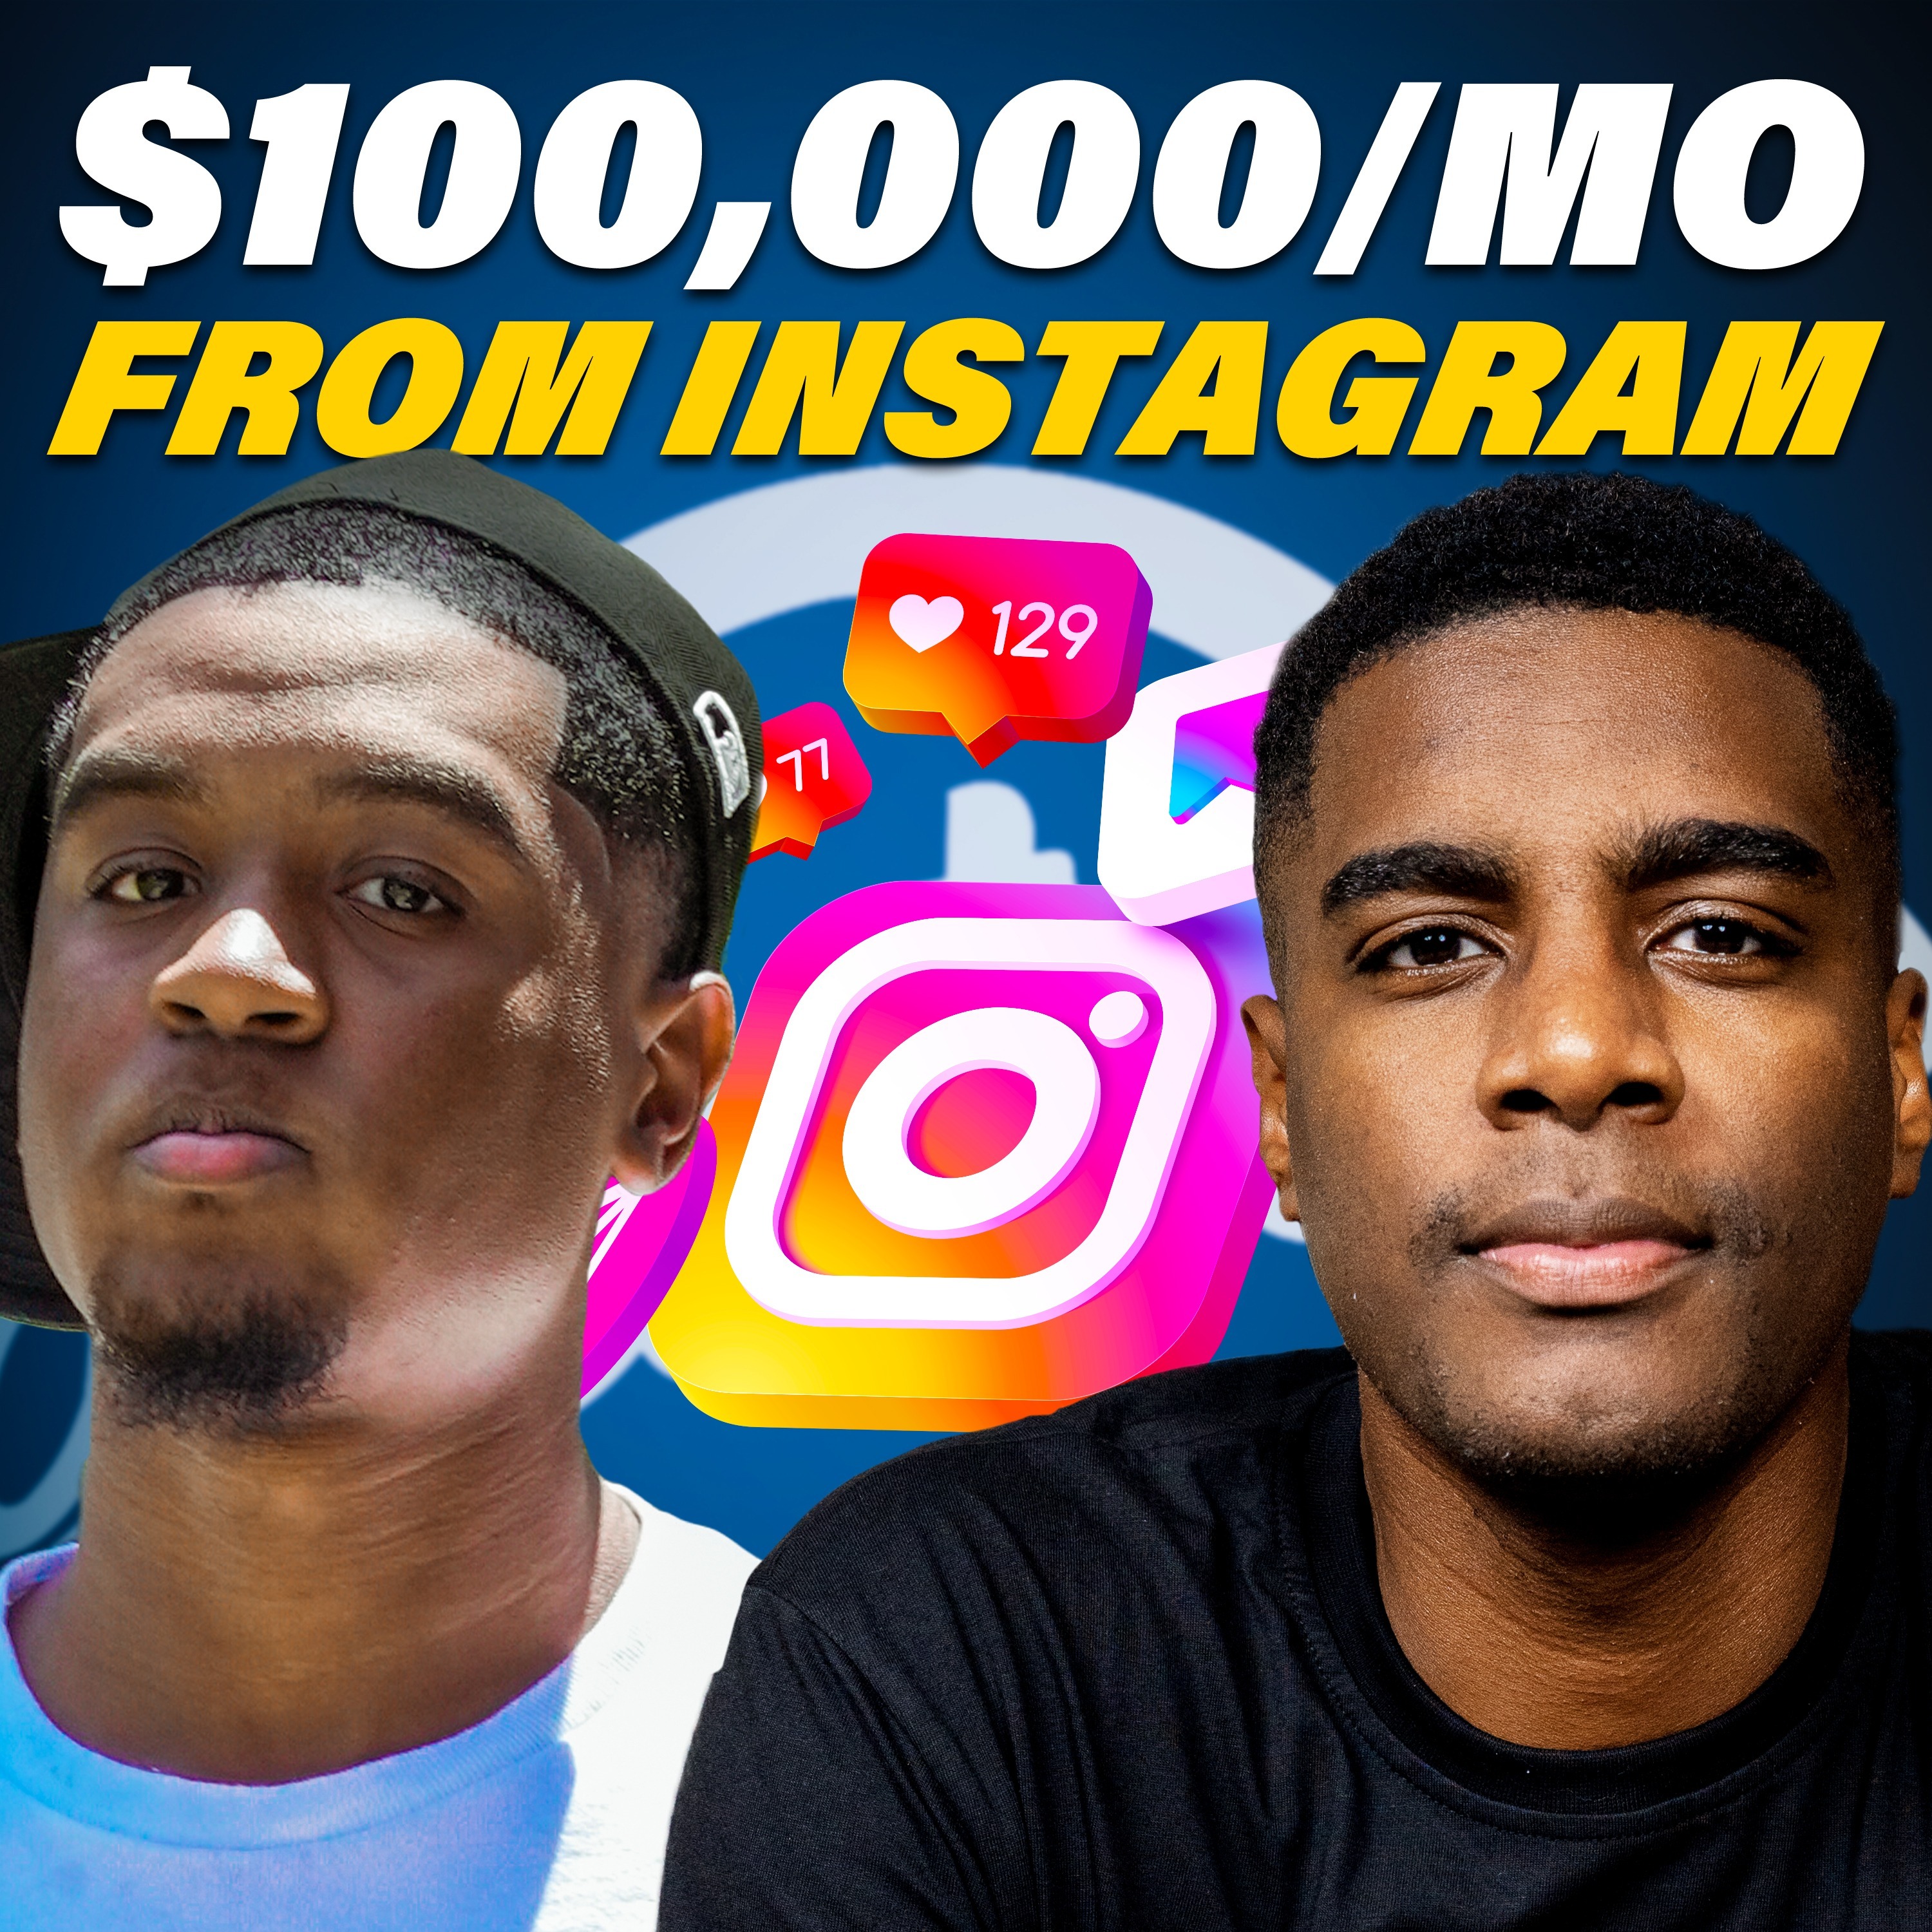 This 22-Year-Old Earns $100K a Month From Instagram - Faceless!